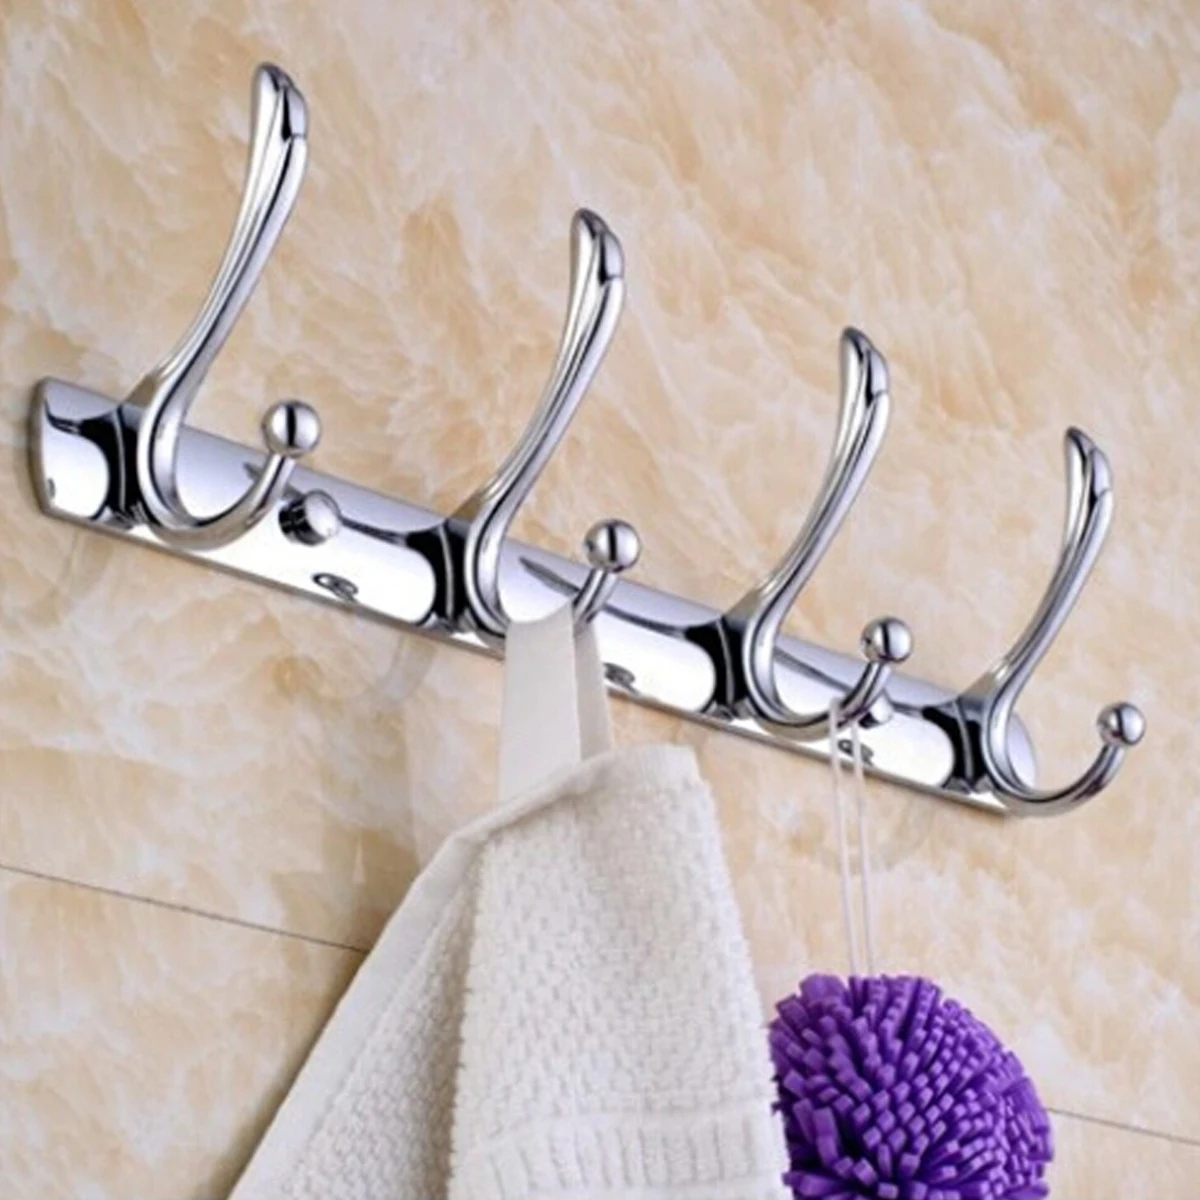 Stainless Steel 4 Hook Wall Coat Hanger Home Wall Mounted Bathroom Stainless Steel Coat Rack Wall Mounted